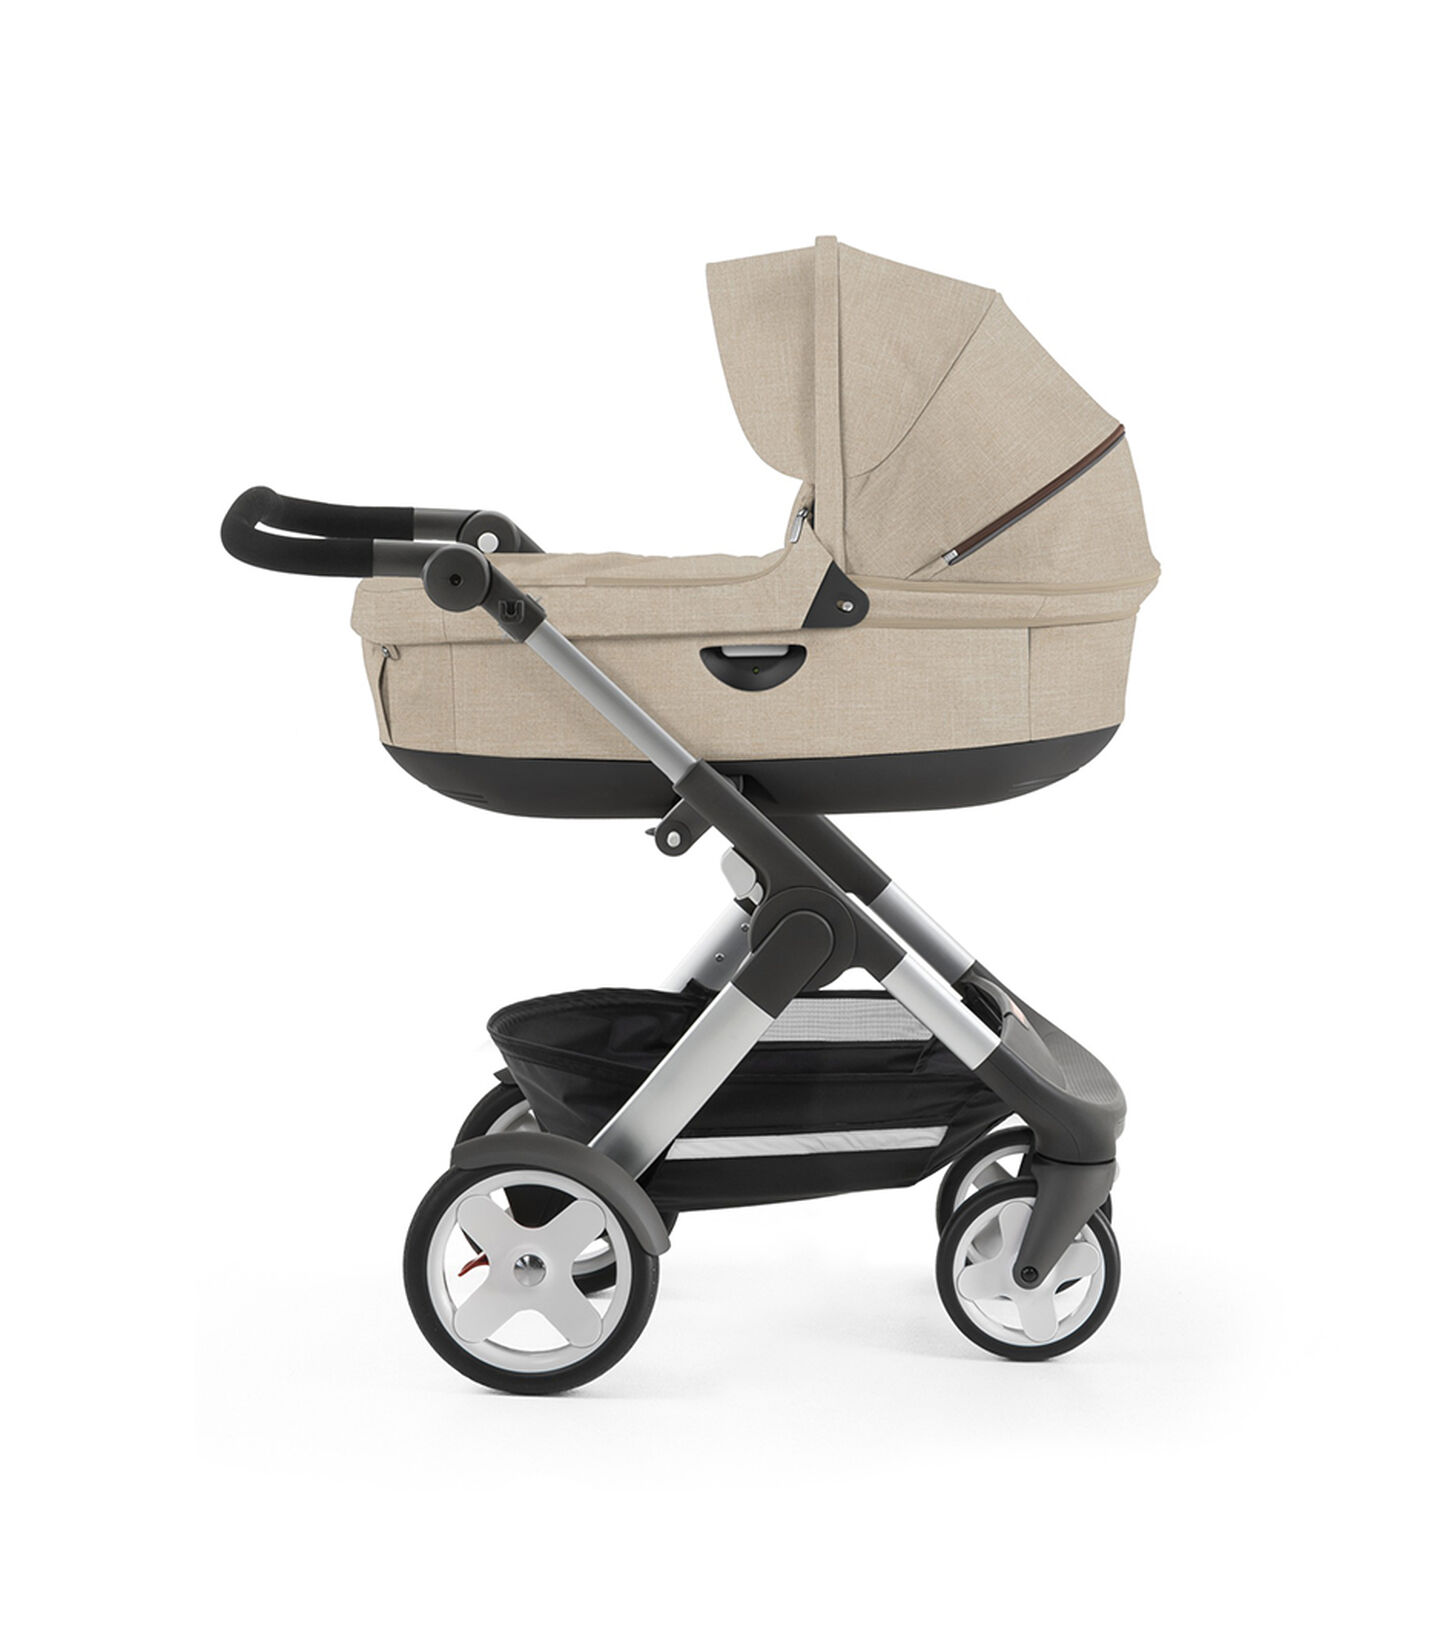 Stokke® Trailz™ with Stokke® Stroller Seat, Red. Classic Wheels. view 6